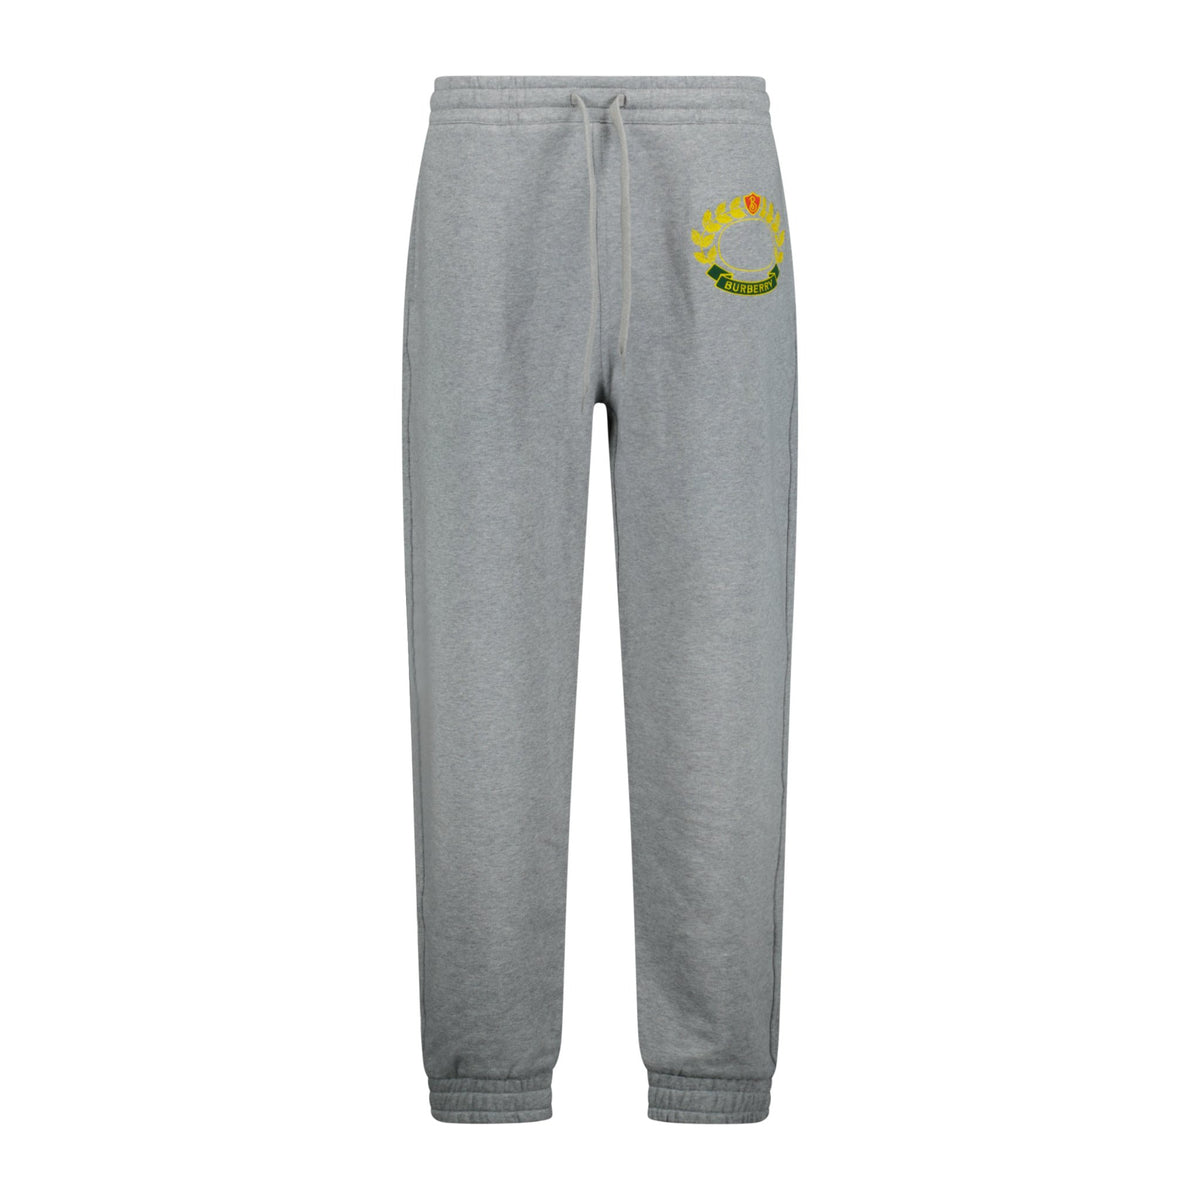 Burberry Cuffed Cashmere Sweatpants men - Glamood Outlet